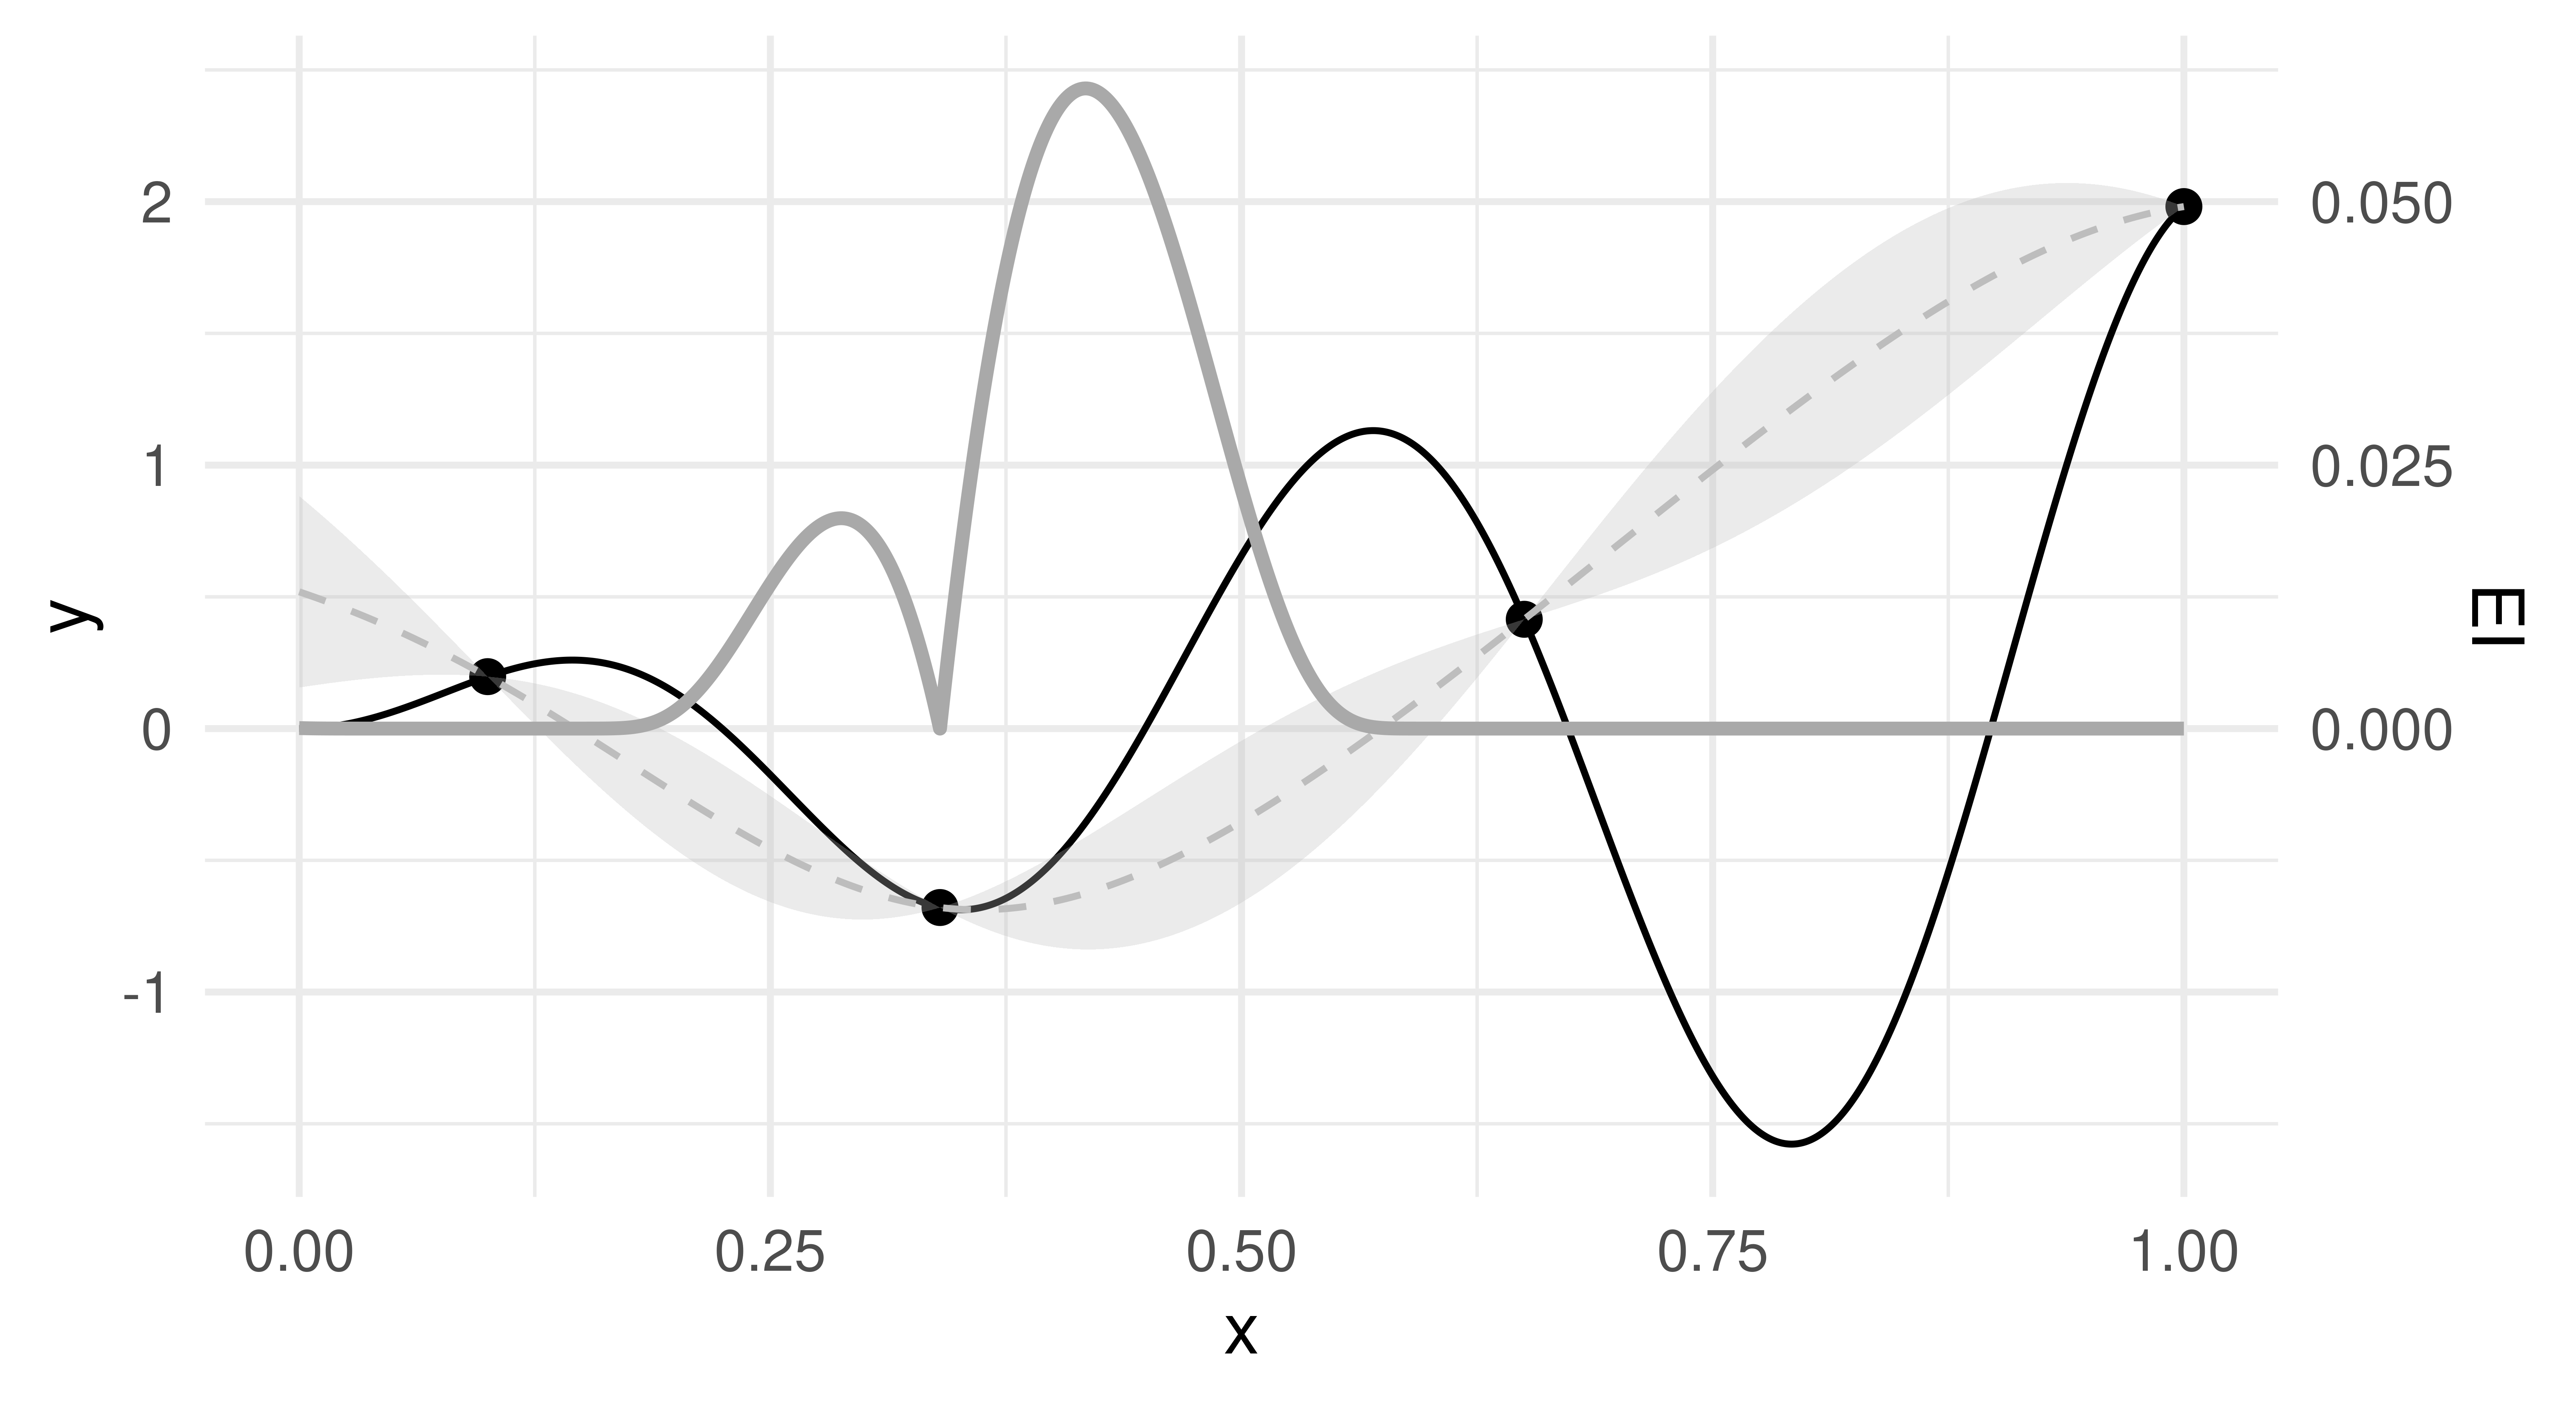 Plot of sinusoidal function plotted previously but now with four black dots at around (0.1, 0), (0.3, -0.8), (0.6, 0.5) and (1, 2). These are connected by a black curve. A gray dotted line is also fit through these black dots in a roughly 'u' shape, a gray ribbon surrounds this suggesting uncertainty.